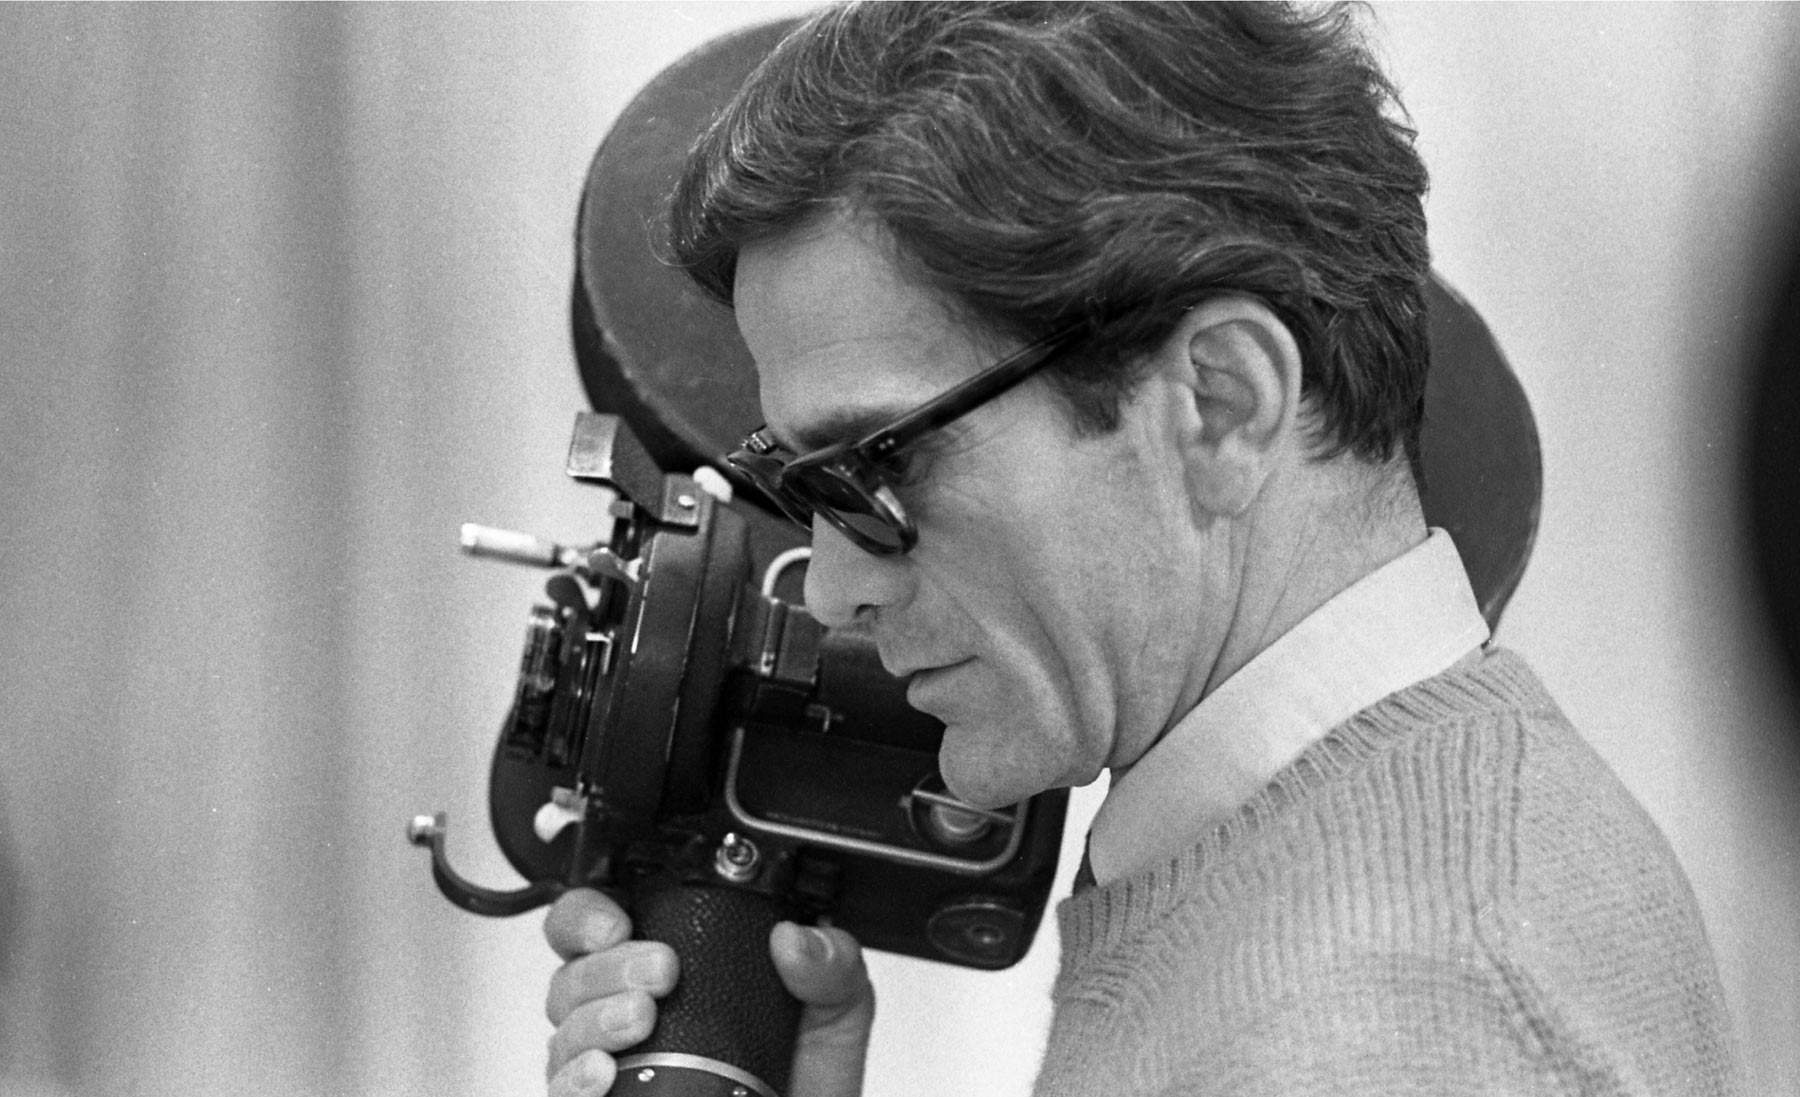 Casa Pasolini will be donated to Roma Capitale: it was purchased by a well-known film producer